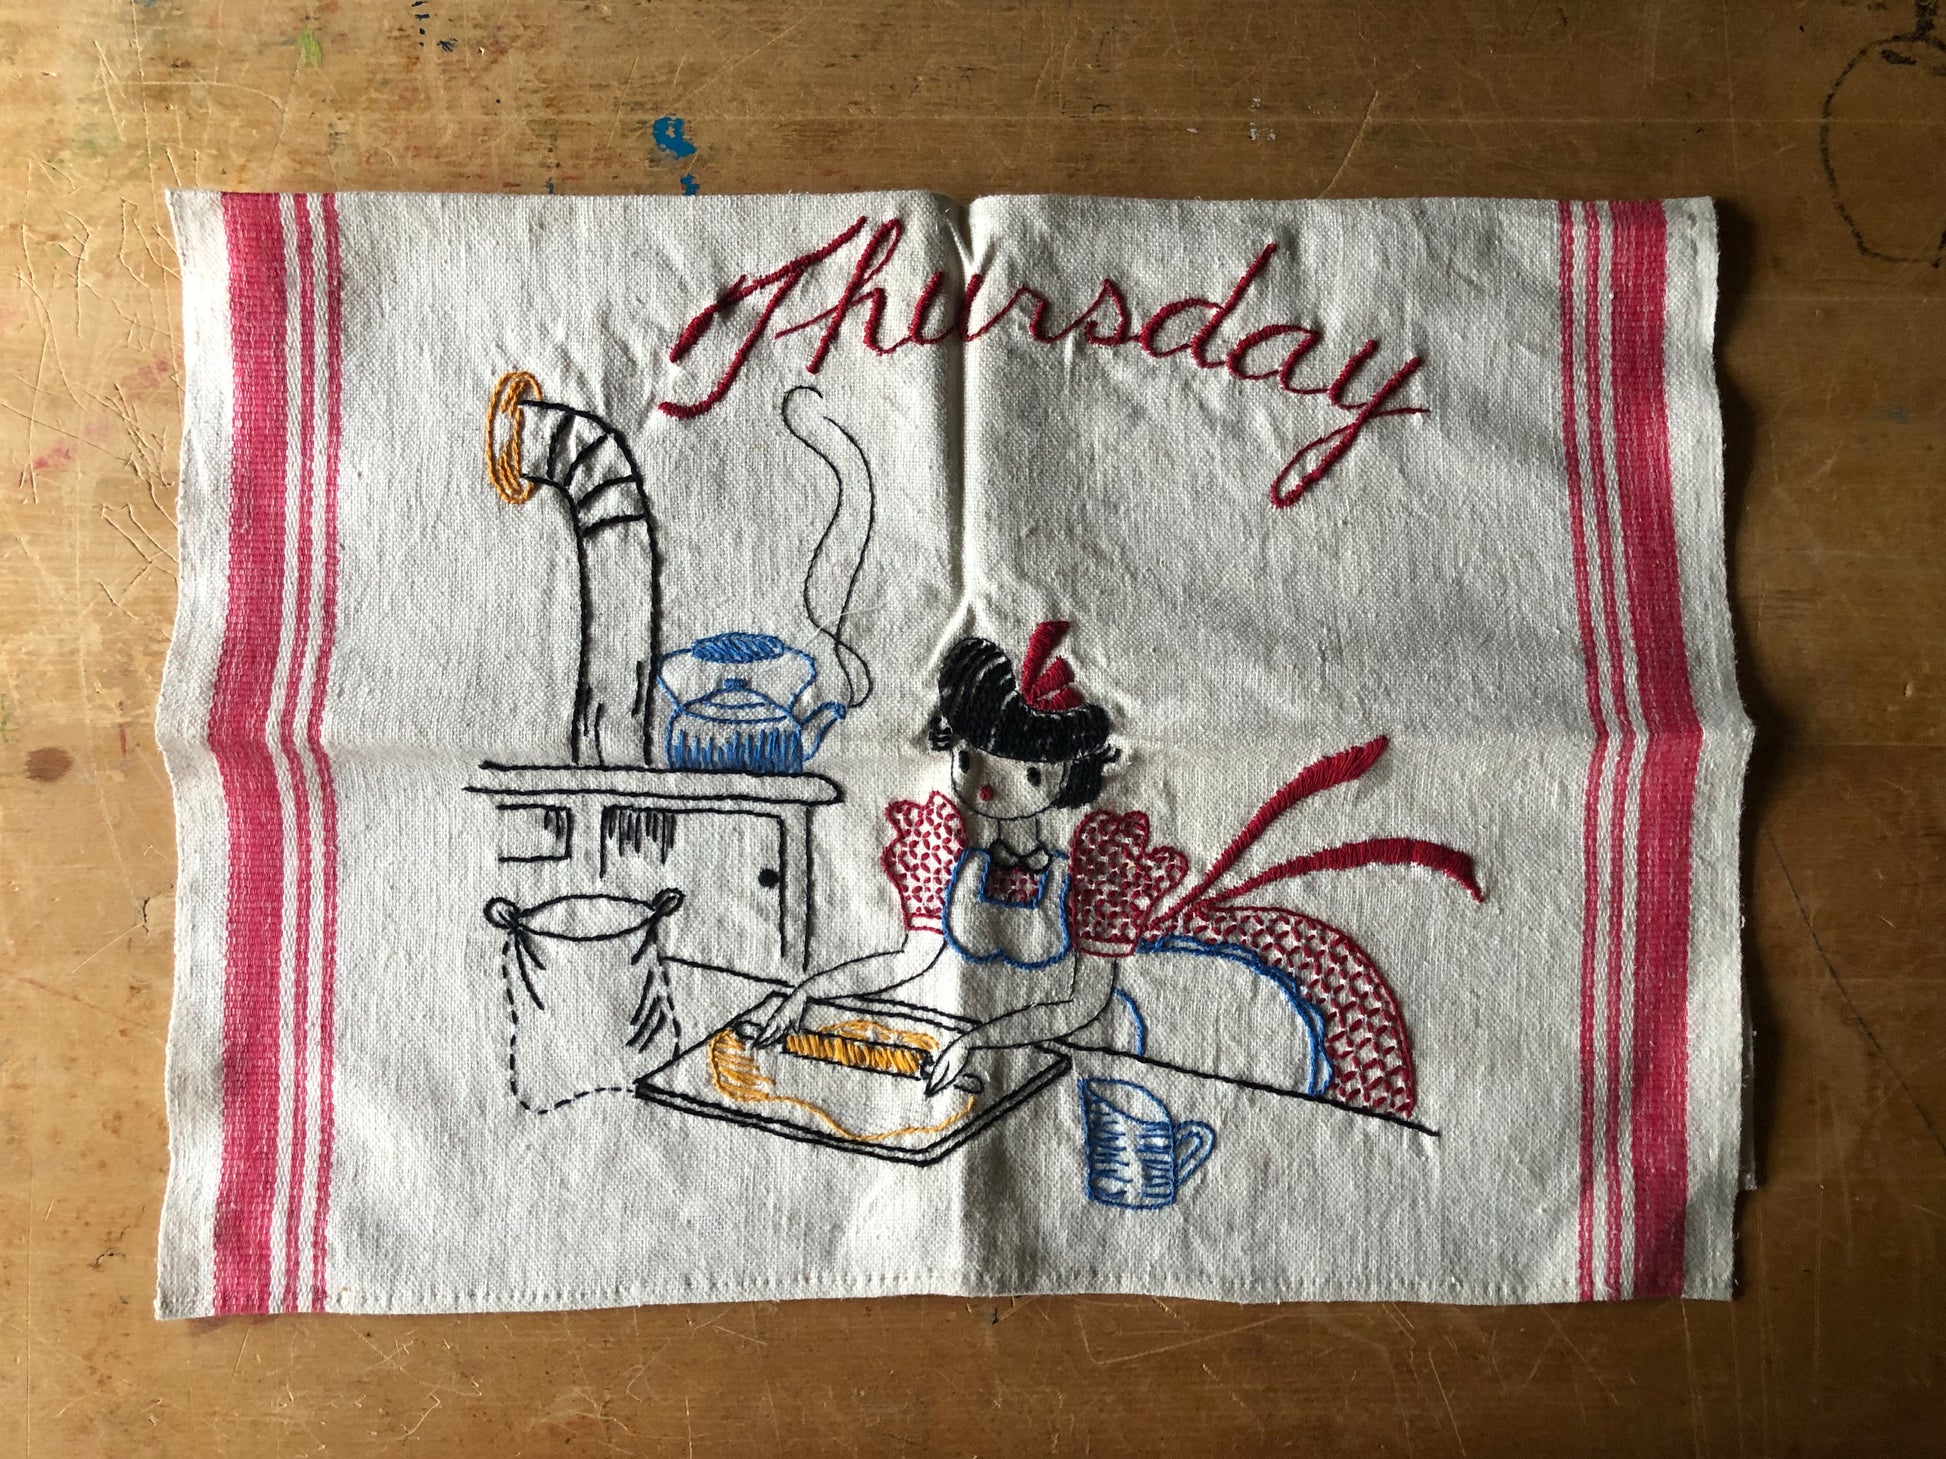 Vintage-Kitchen Embroidered Towels-Days Wednesday And Thursday